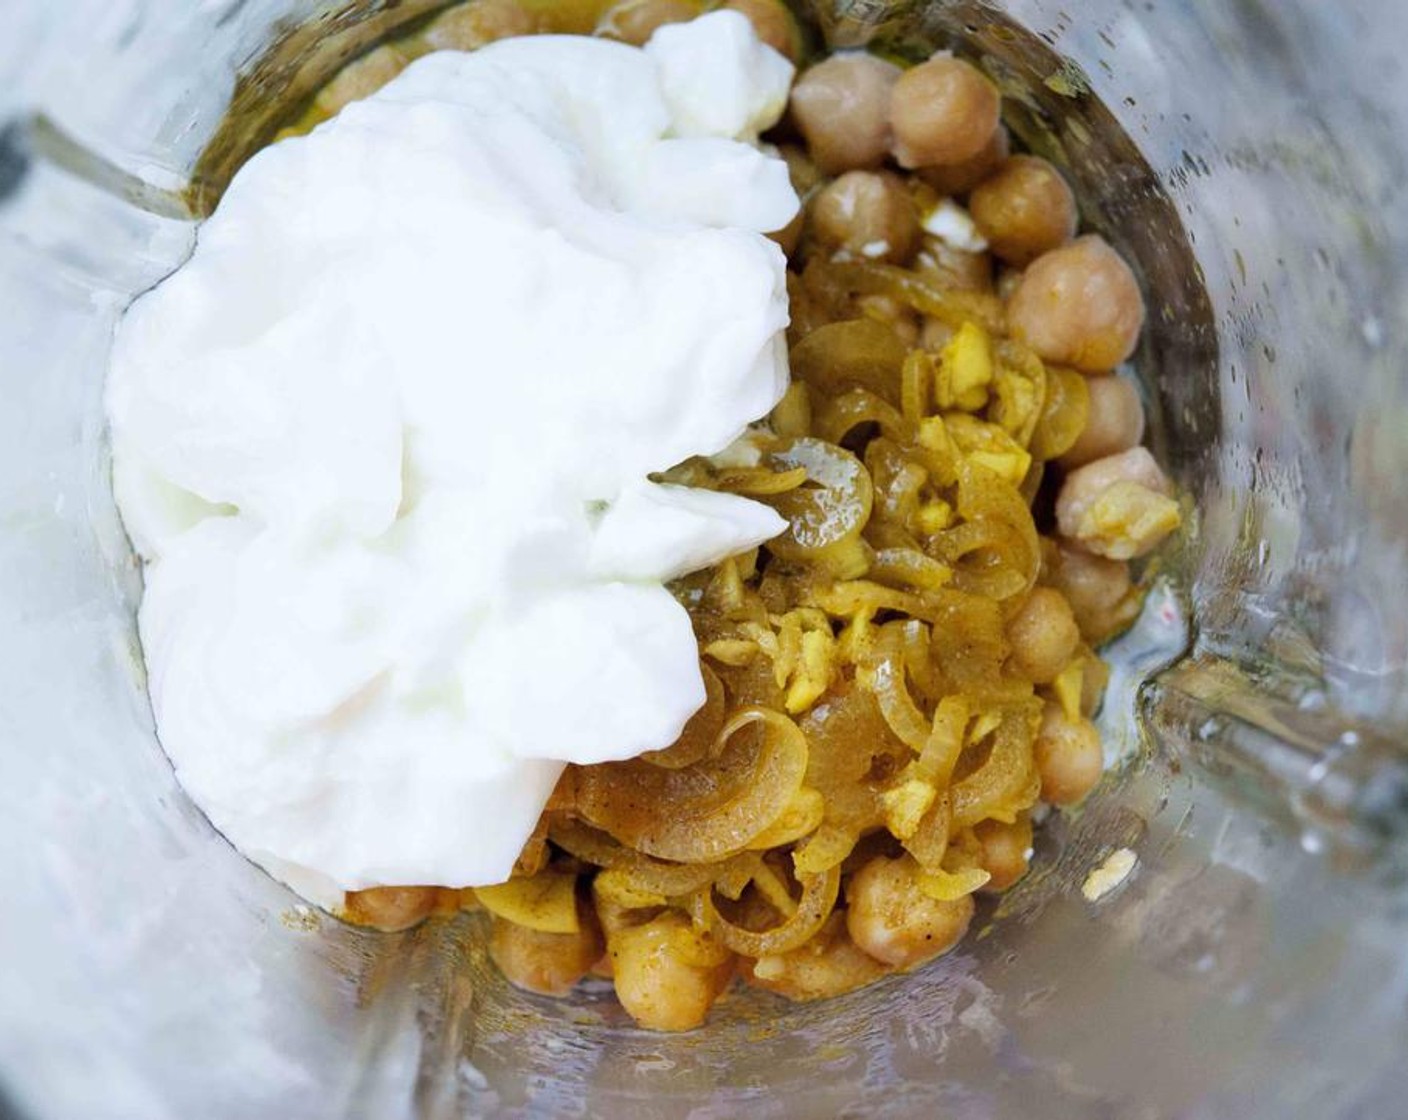 step 3 In a blender or food processor combine Canned Chickpeas (1 1/2 cups), Greek Yogurt (1/2 cup), onion and garlic, Lime (1), Salt (to taste), and Ground Black Pepper (to taste).